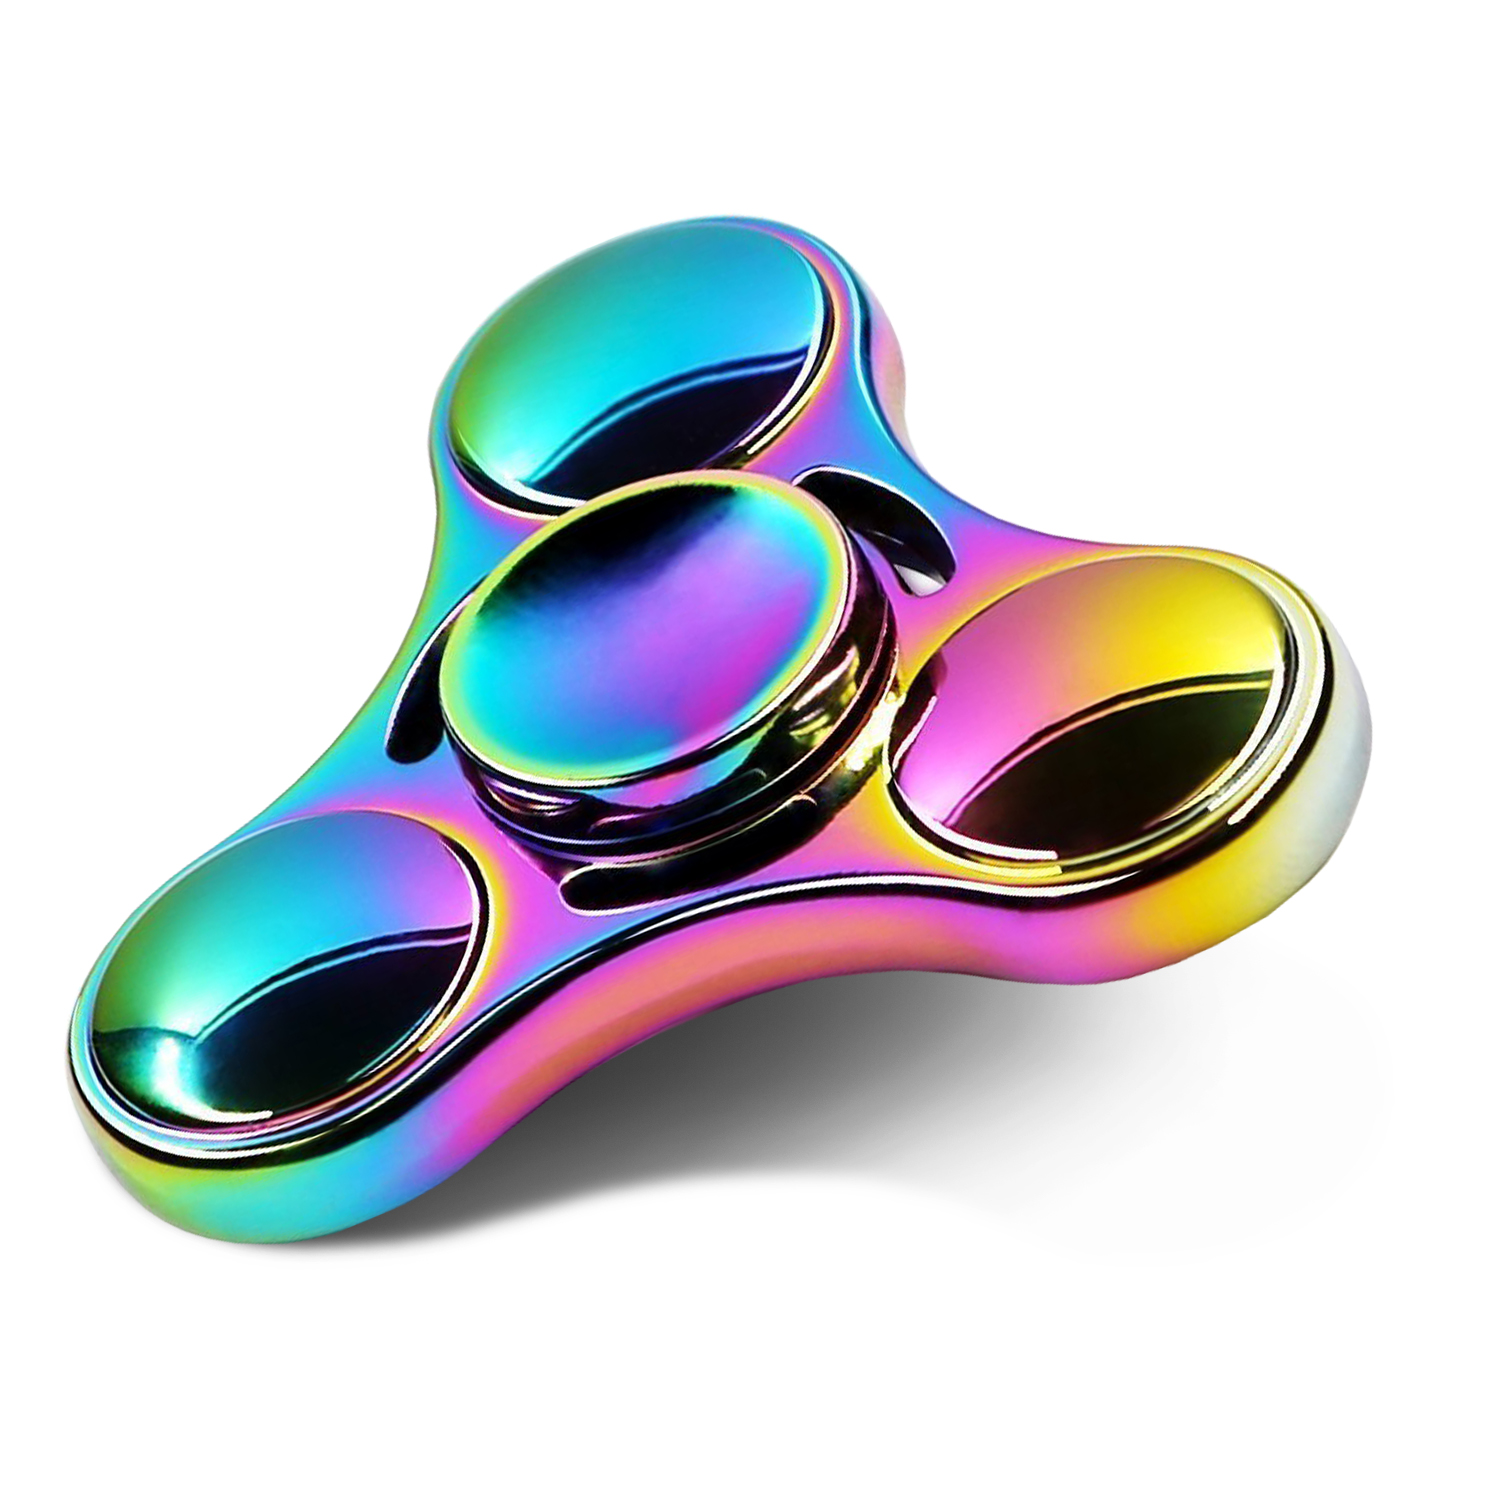 what's a hand spinner